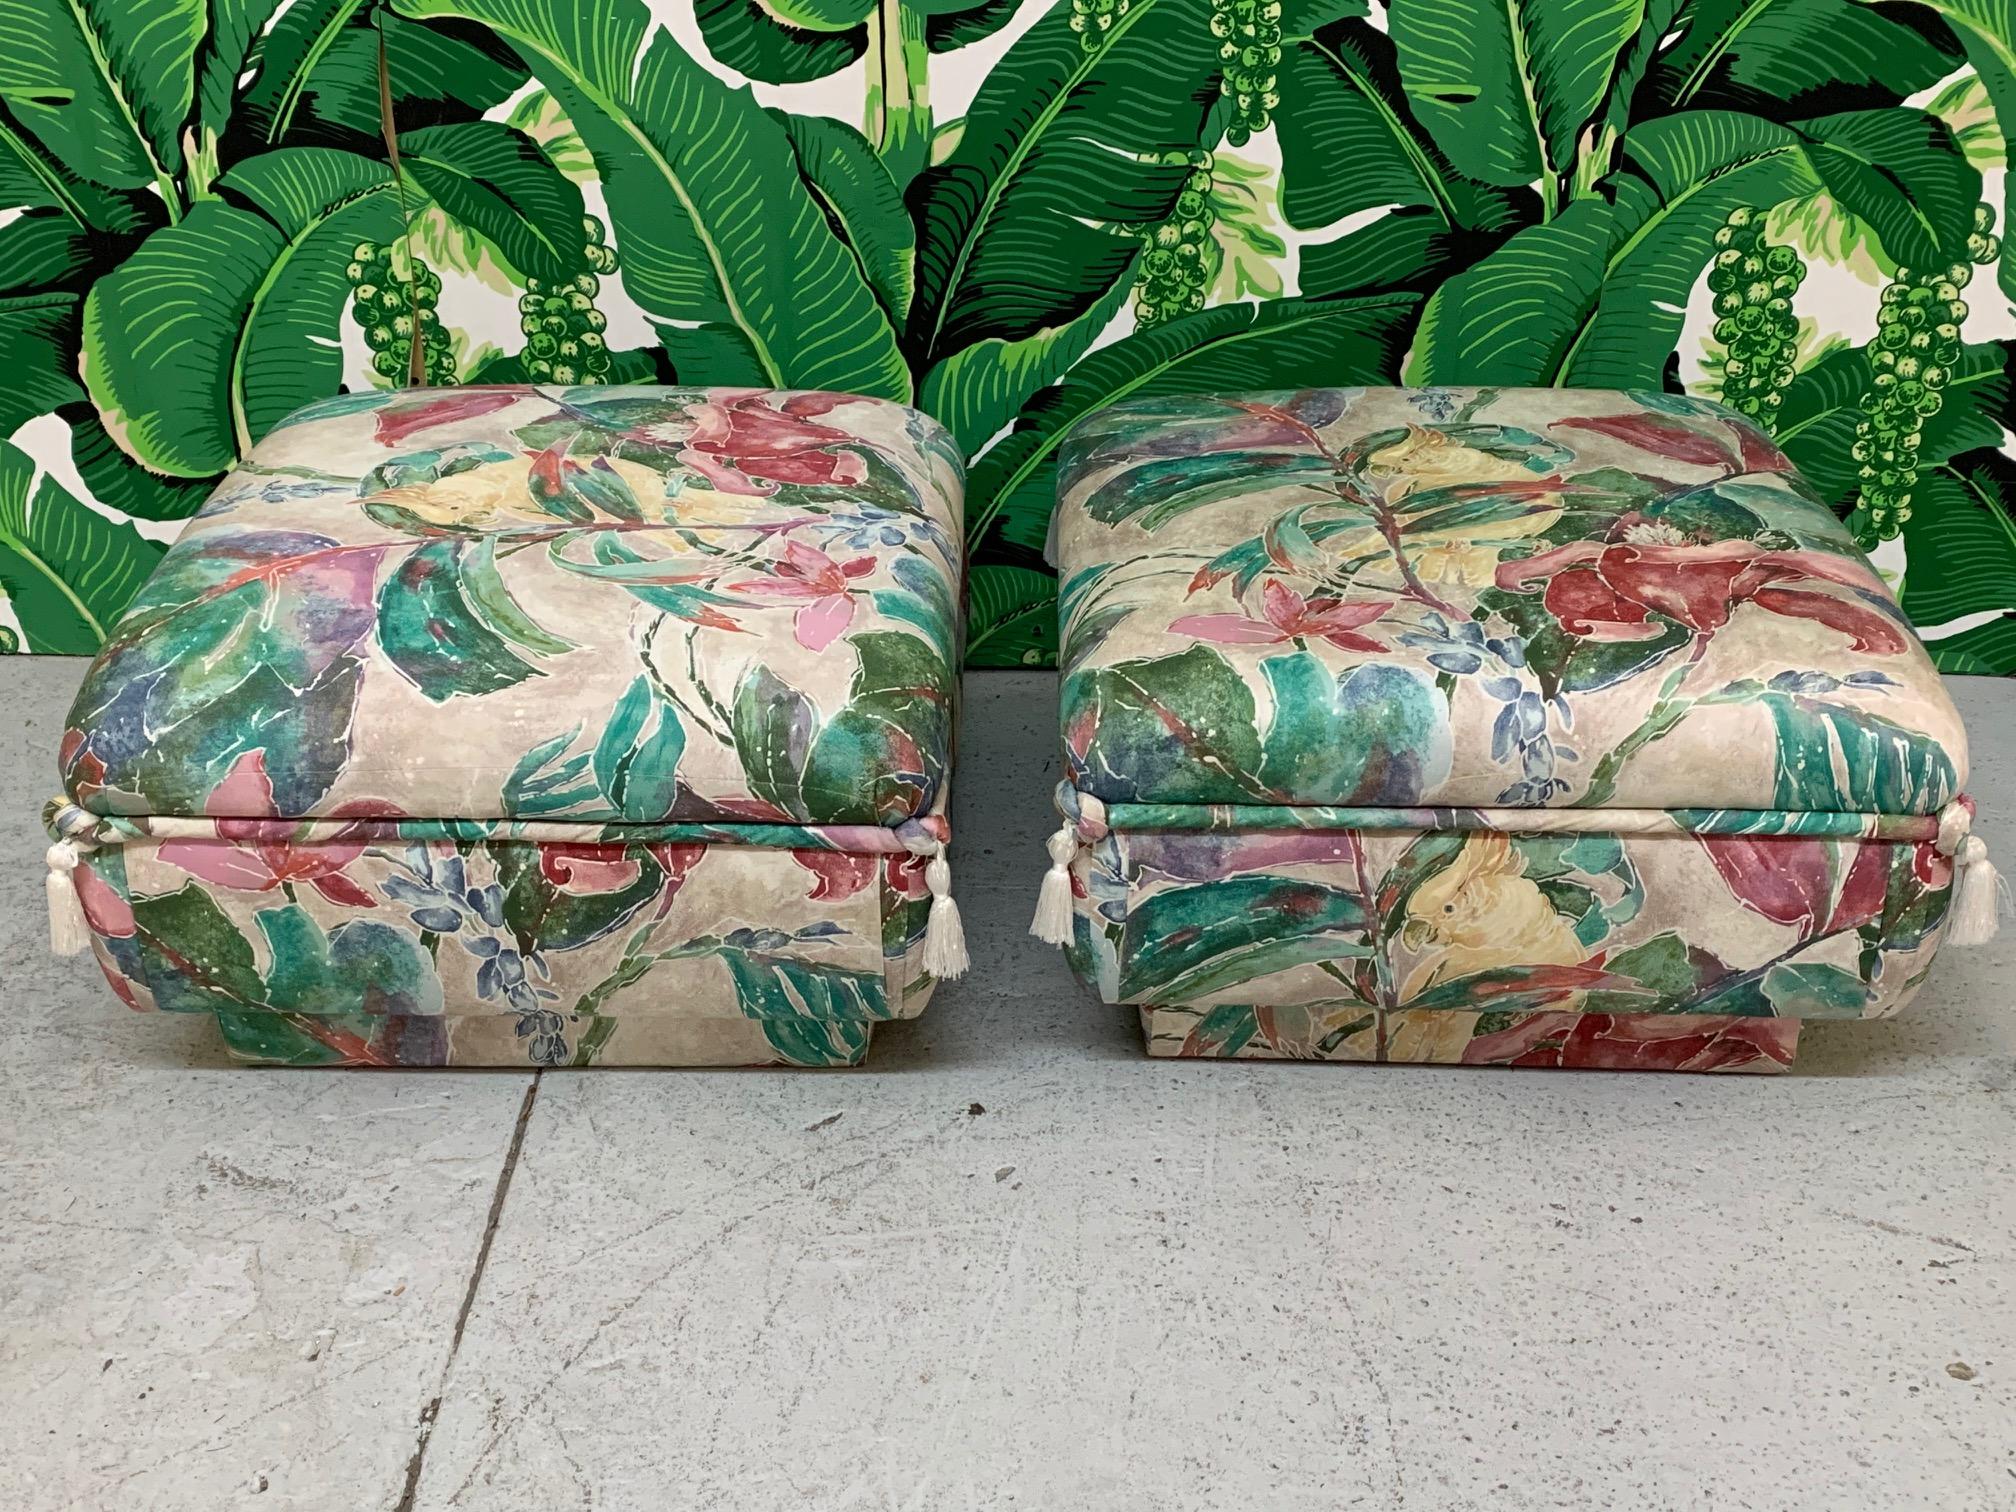 Matching pair of ottomans feature a bold print with tropical birds and flowers along with decorative tassels and an upholstered plinth base. Can be used as seating or footstools. Very comfortable! Very good condition with no stains, tears, or marks.